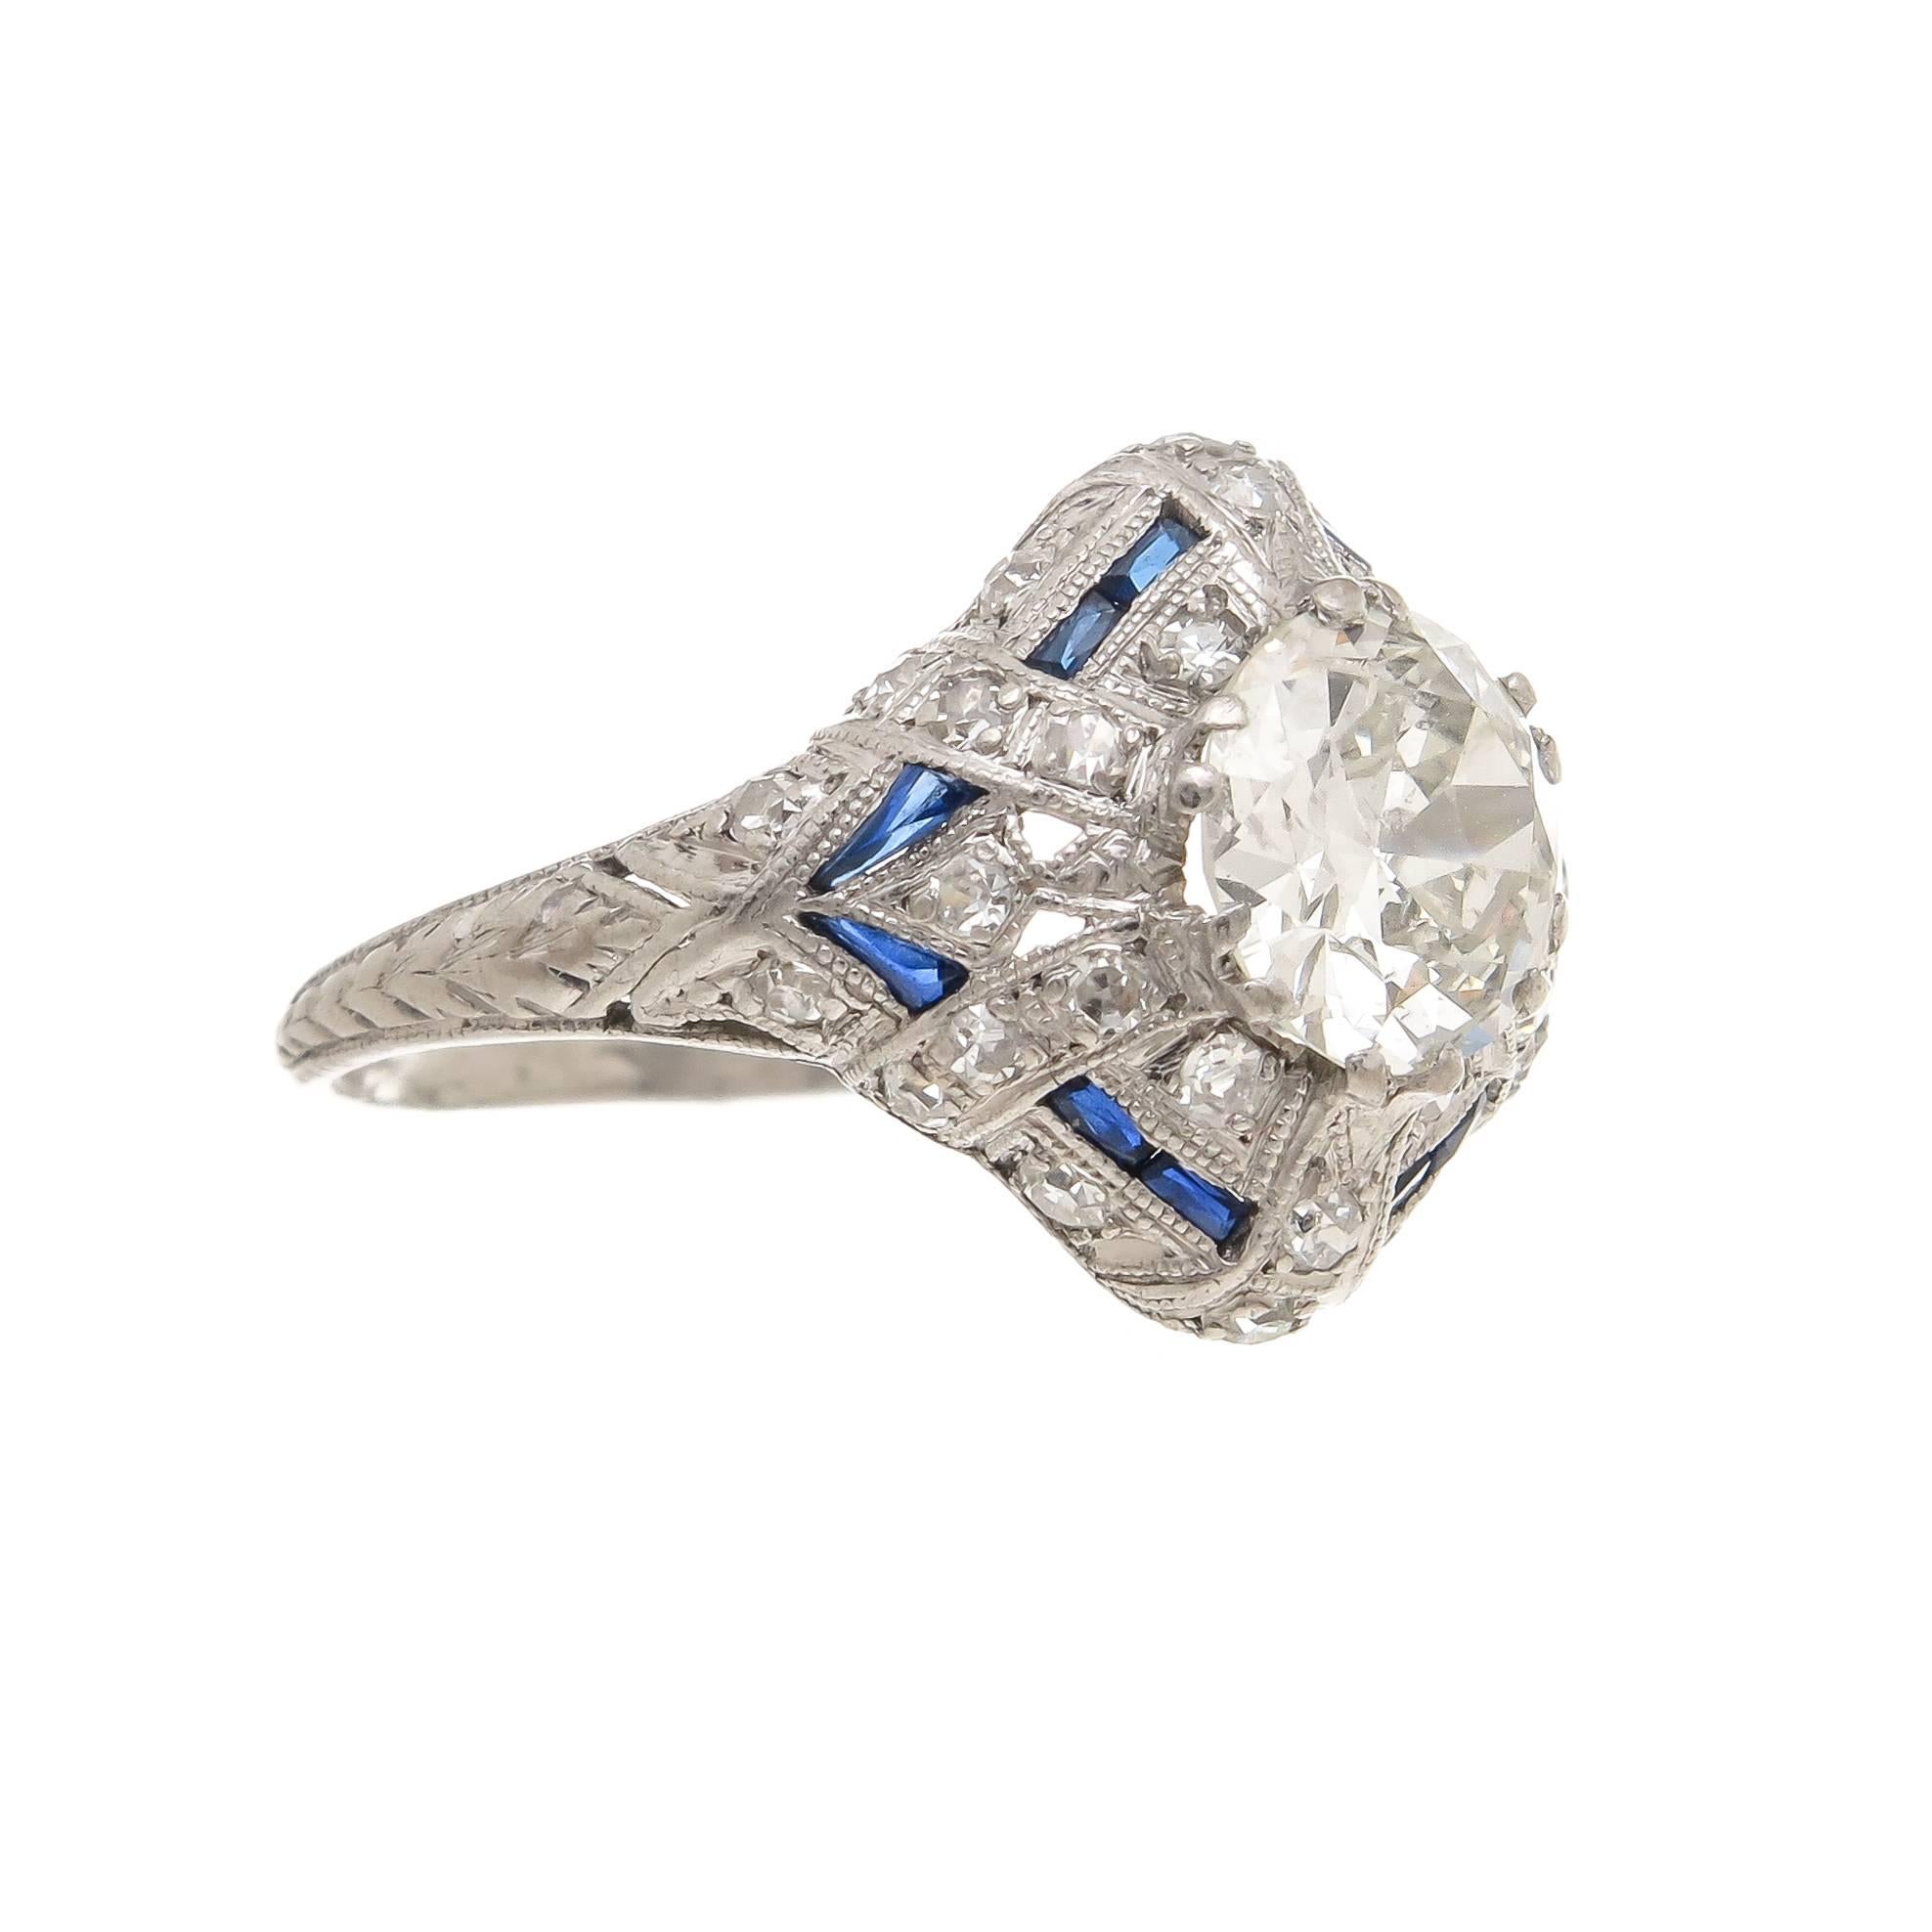 Circa 1930 Platinum Engagement Ring, centrally set with 1.20 carat European cut Diamond that is I in color and SI 2 in clarity. The mounting is further set with numerous smaller old cut diamonds and sapphires. An all original estate Ring. Finger